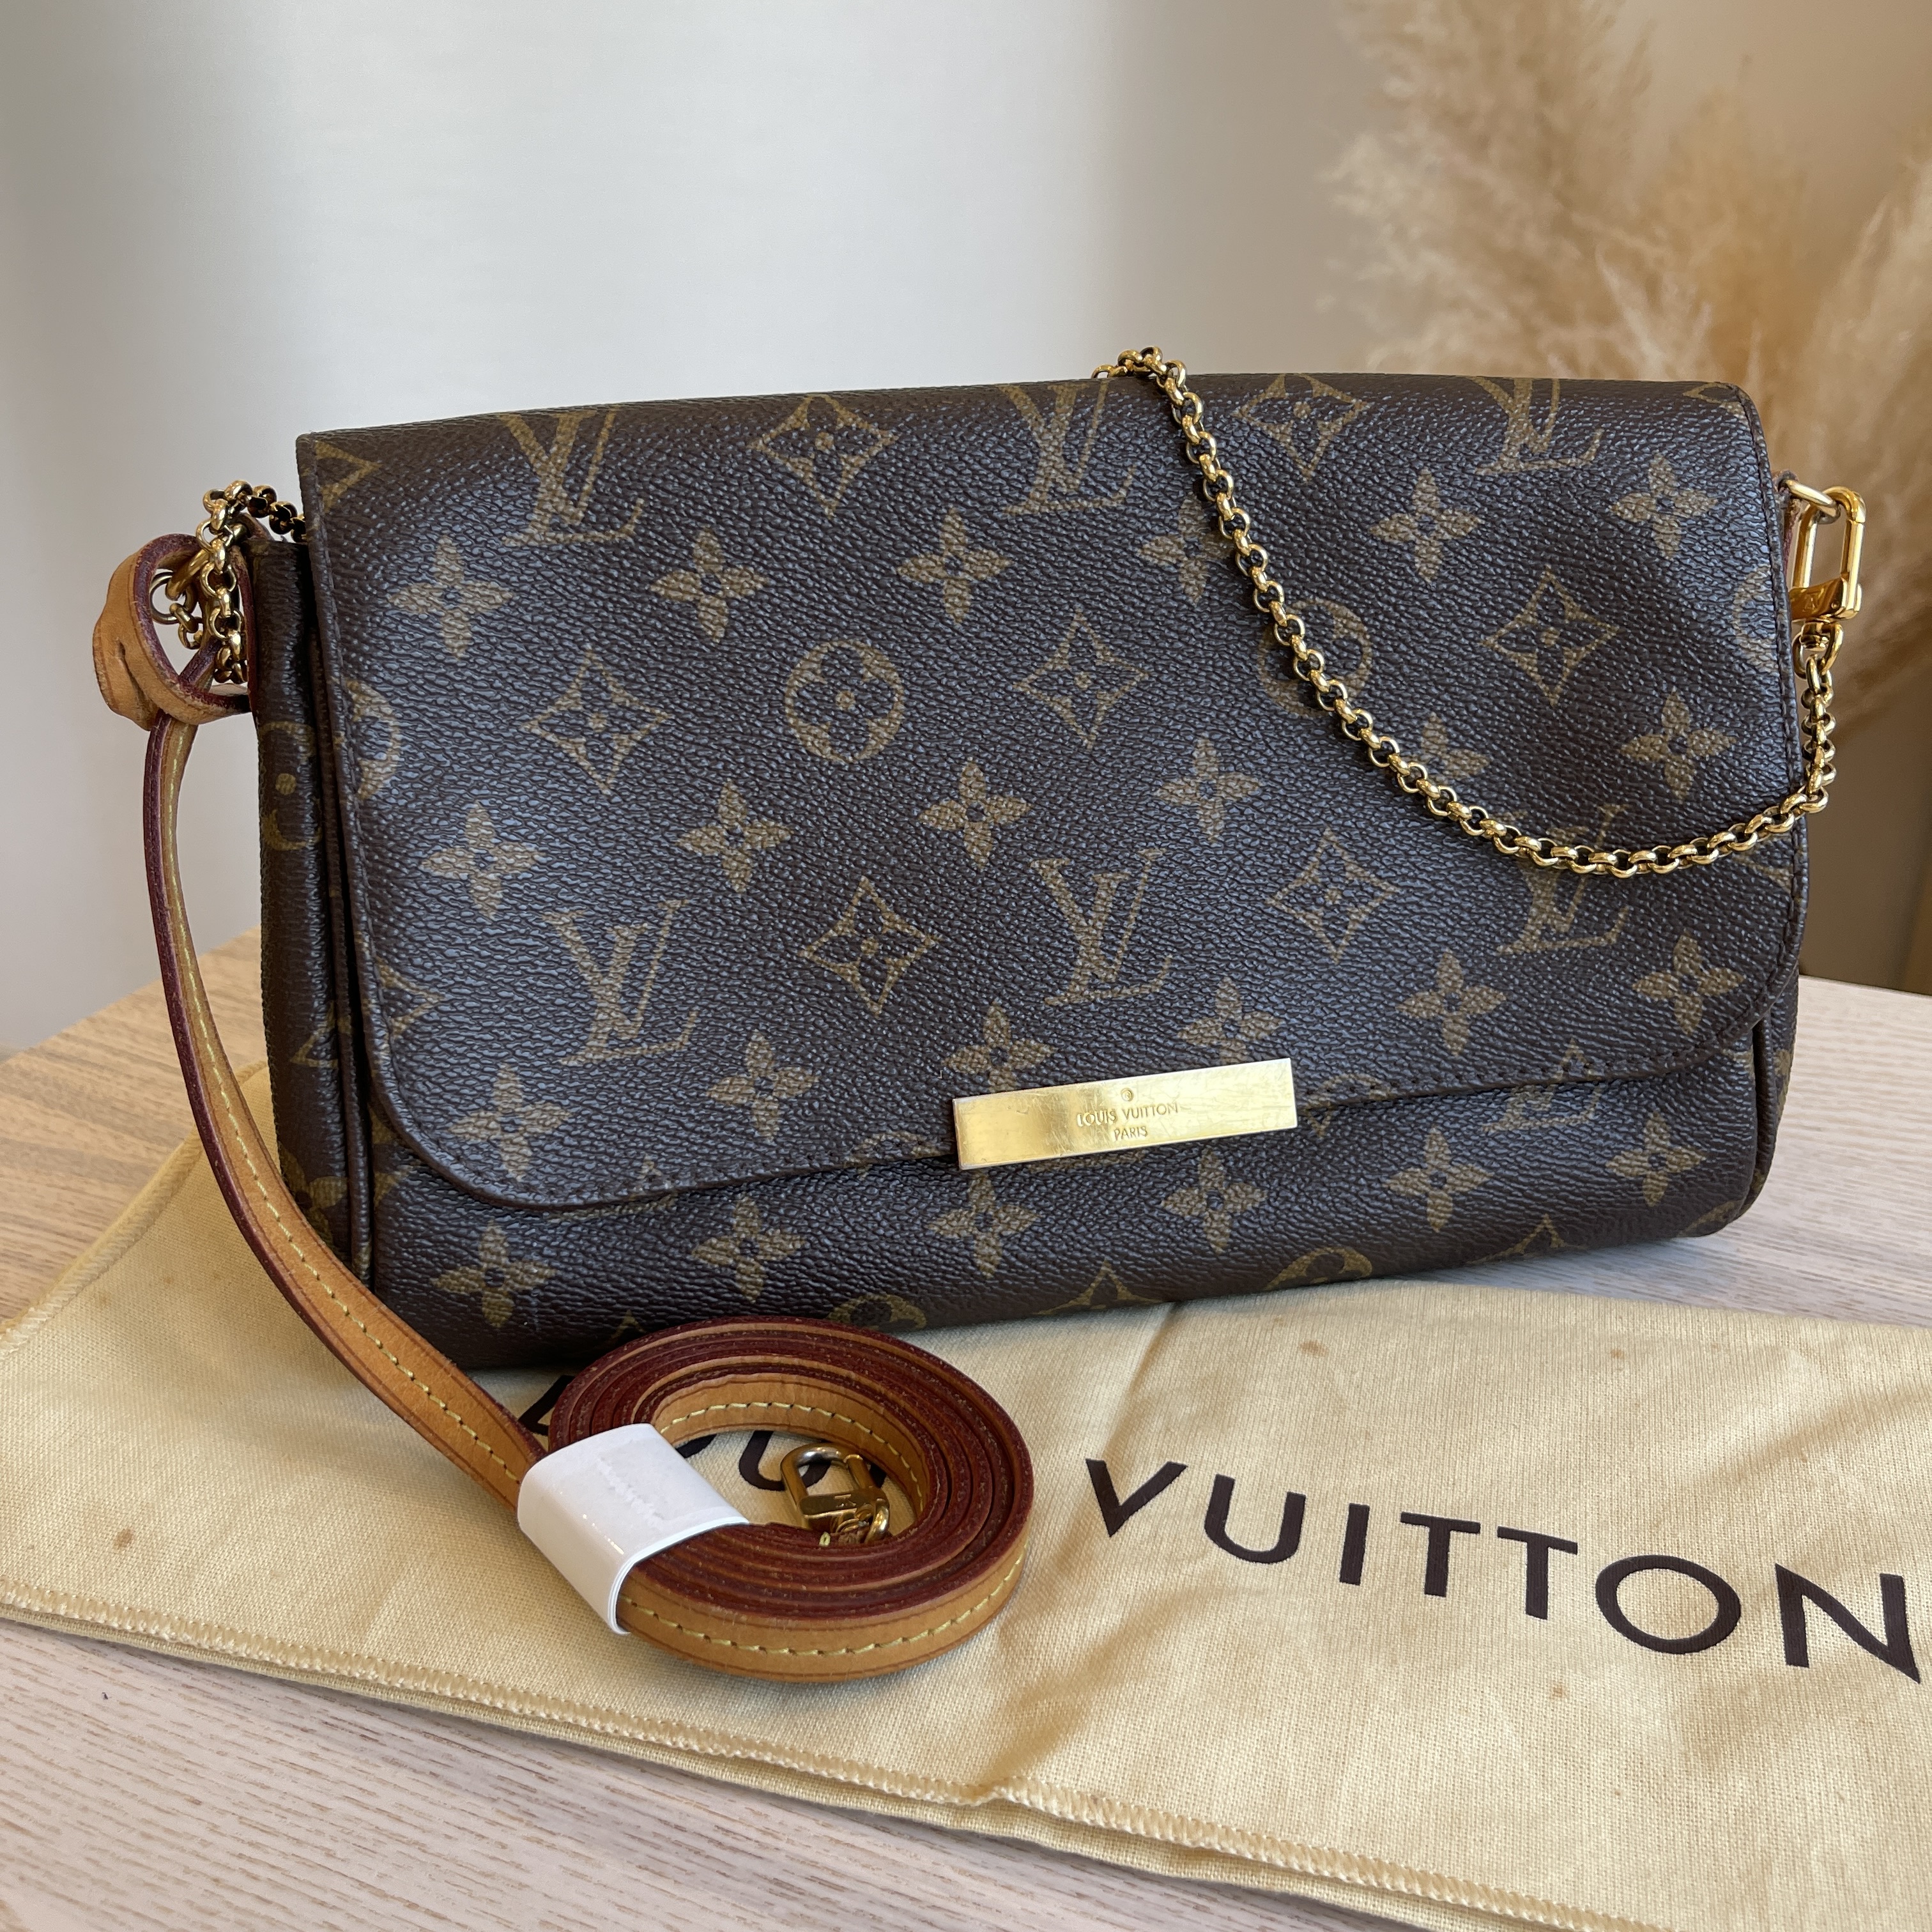 Brand New medium sized Authentic Louis Vuitton. With box and dust